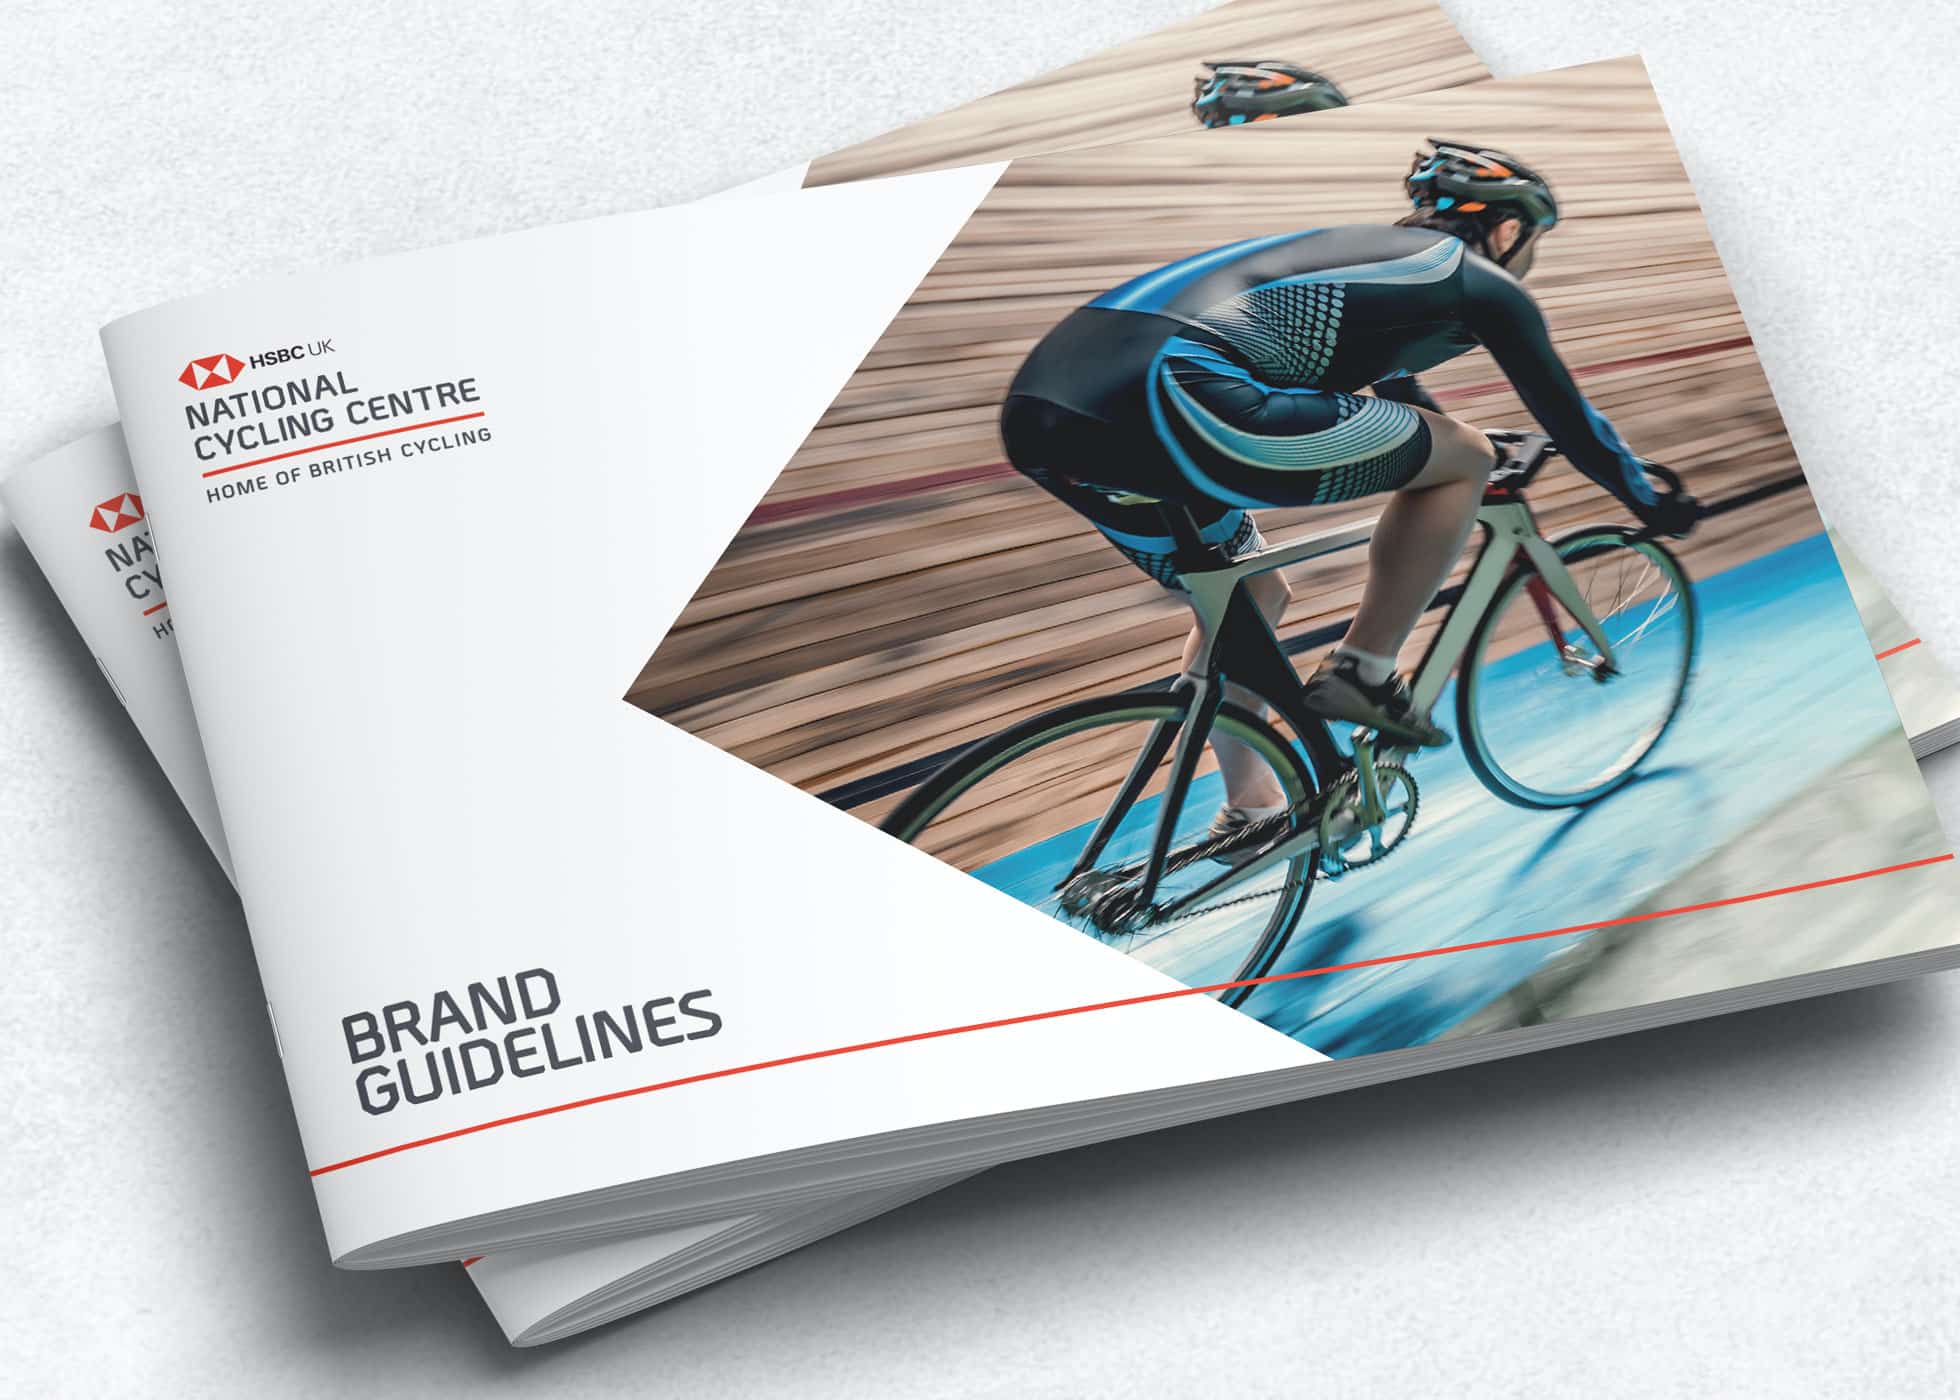 Branded Guidelines HSBC National Cycling Centre Brand Guidelines